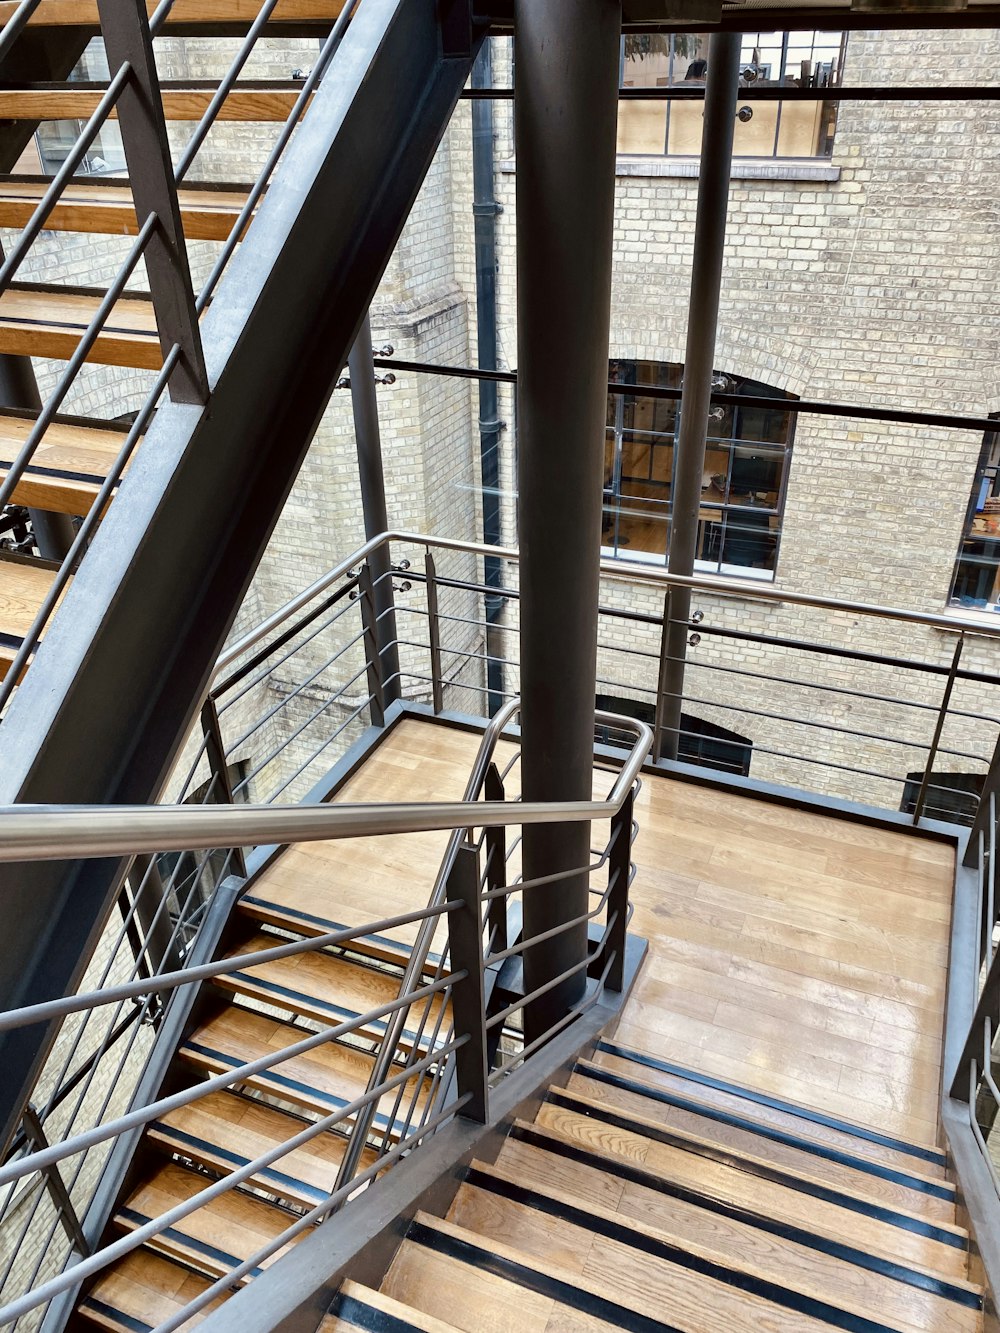 a view of a metal stair case in a building